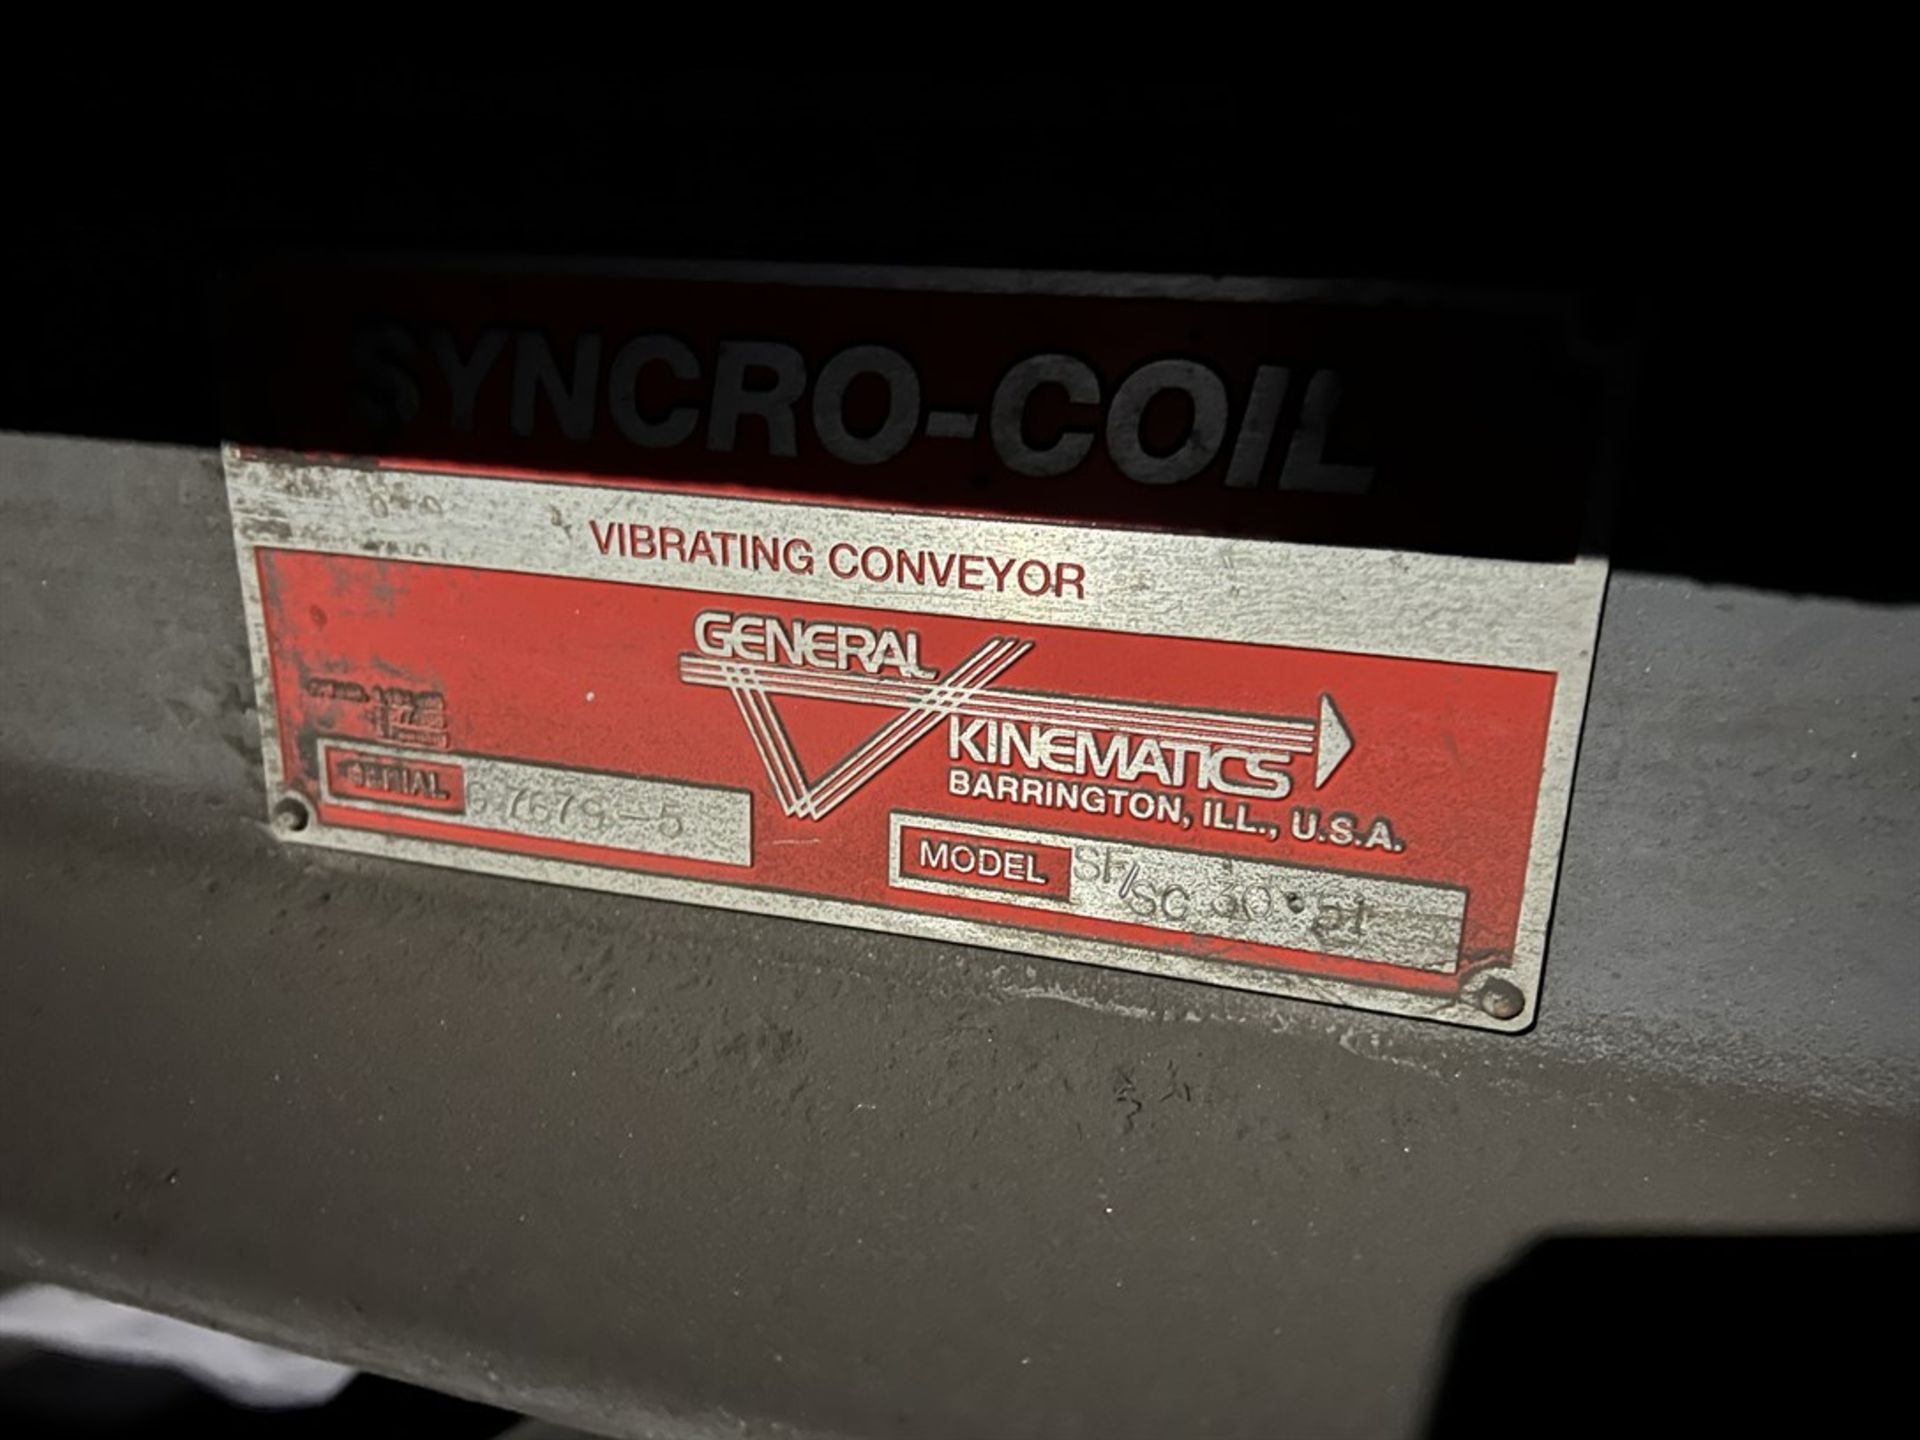 GENERAL KINEMATICS Syncro-Coil SF/SC 30-51 Vibrating Conveyor, s/n G7679-5 - Image 3 of 5